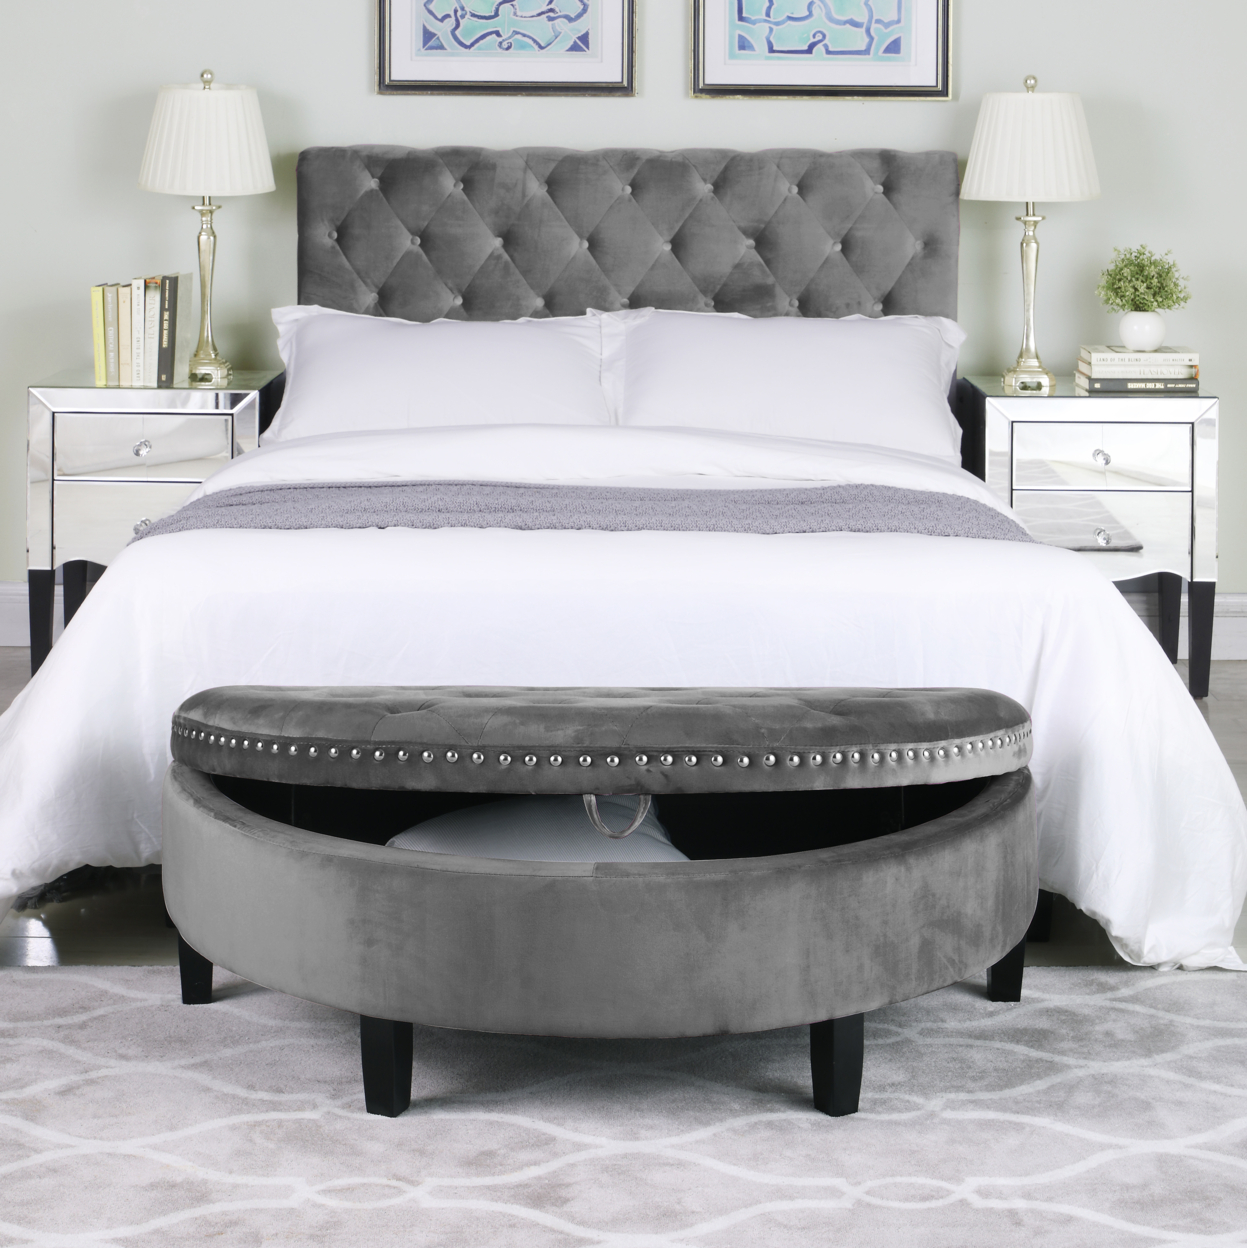 Sarah Half Moon Storage Ottoman Button Tufted Velvet Upholstered Gold Nailhead Trim Espresso Finished Wood Legs Bench - Silver